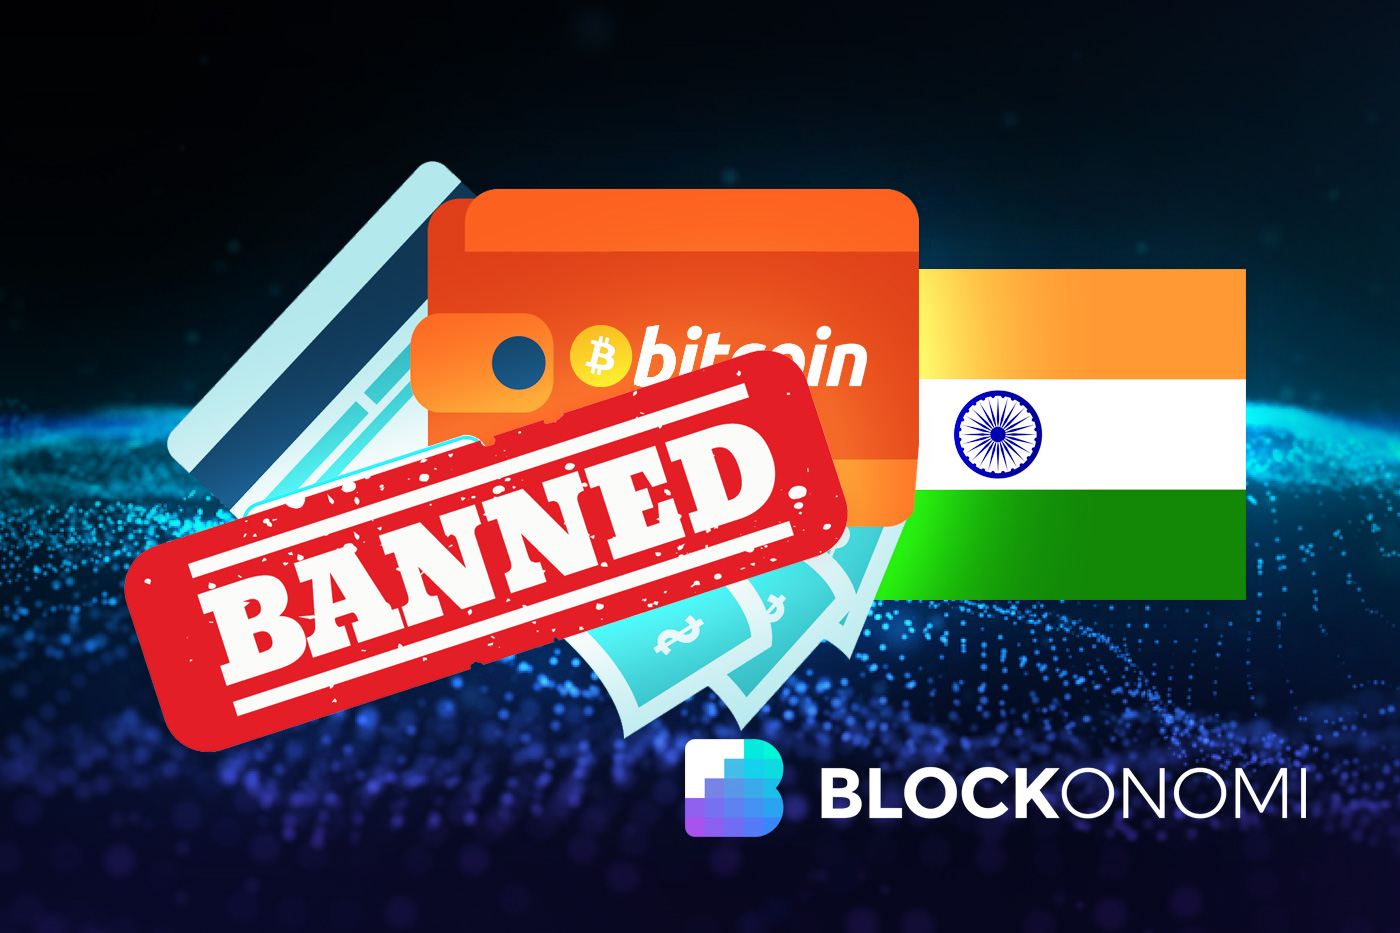 india to ban crypto currency